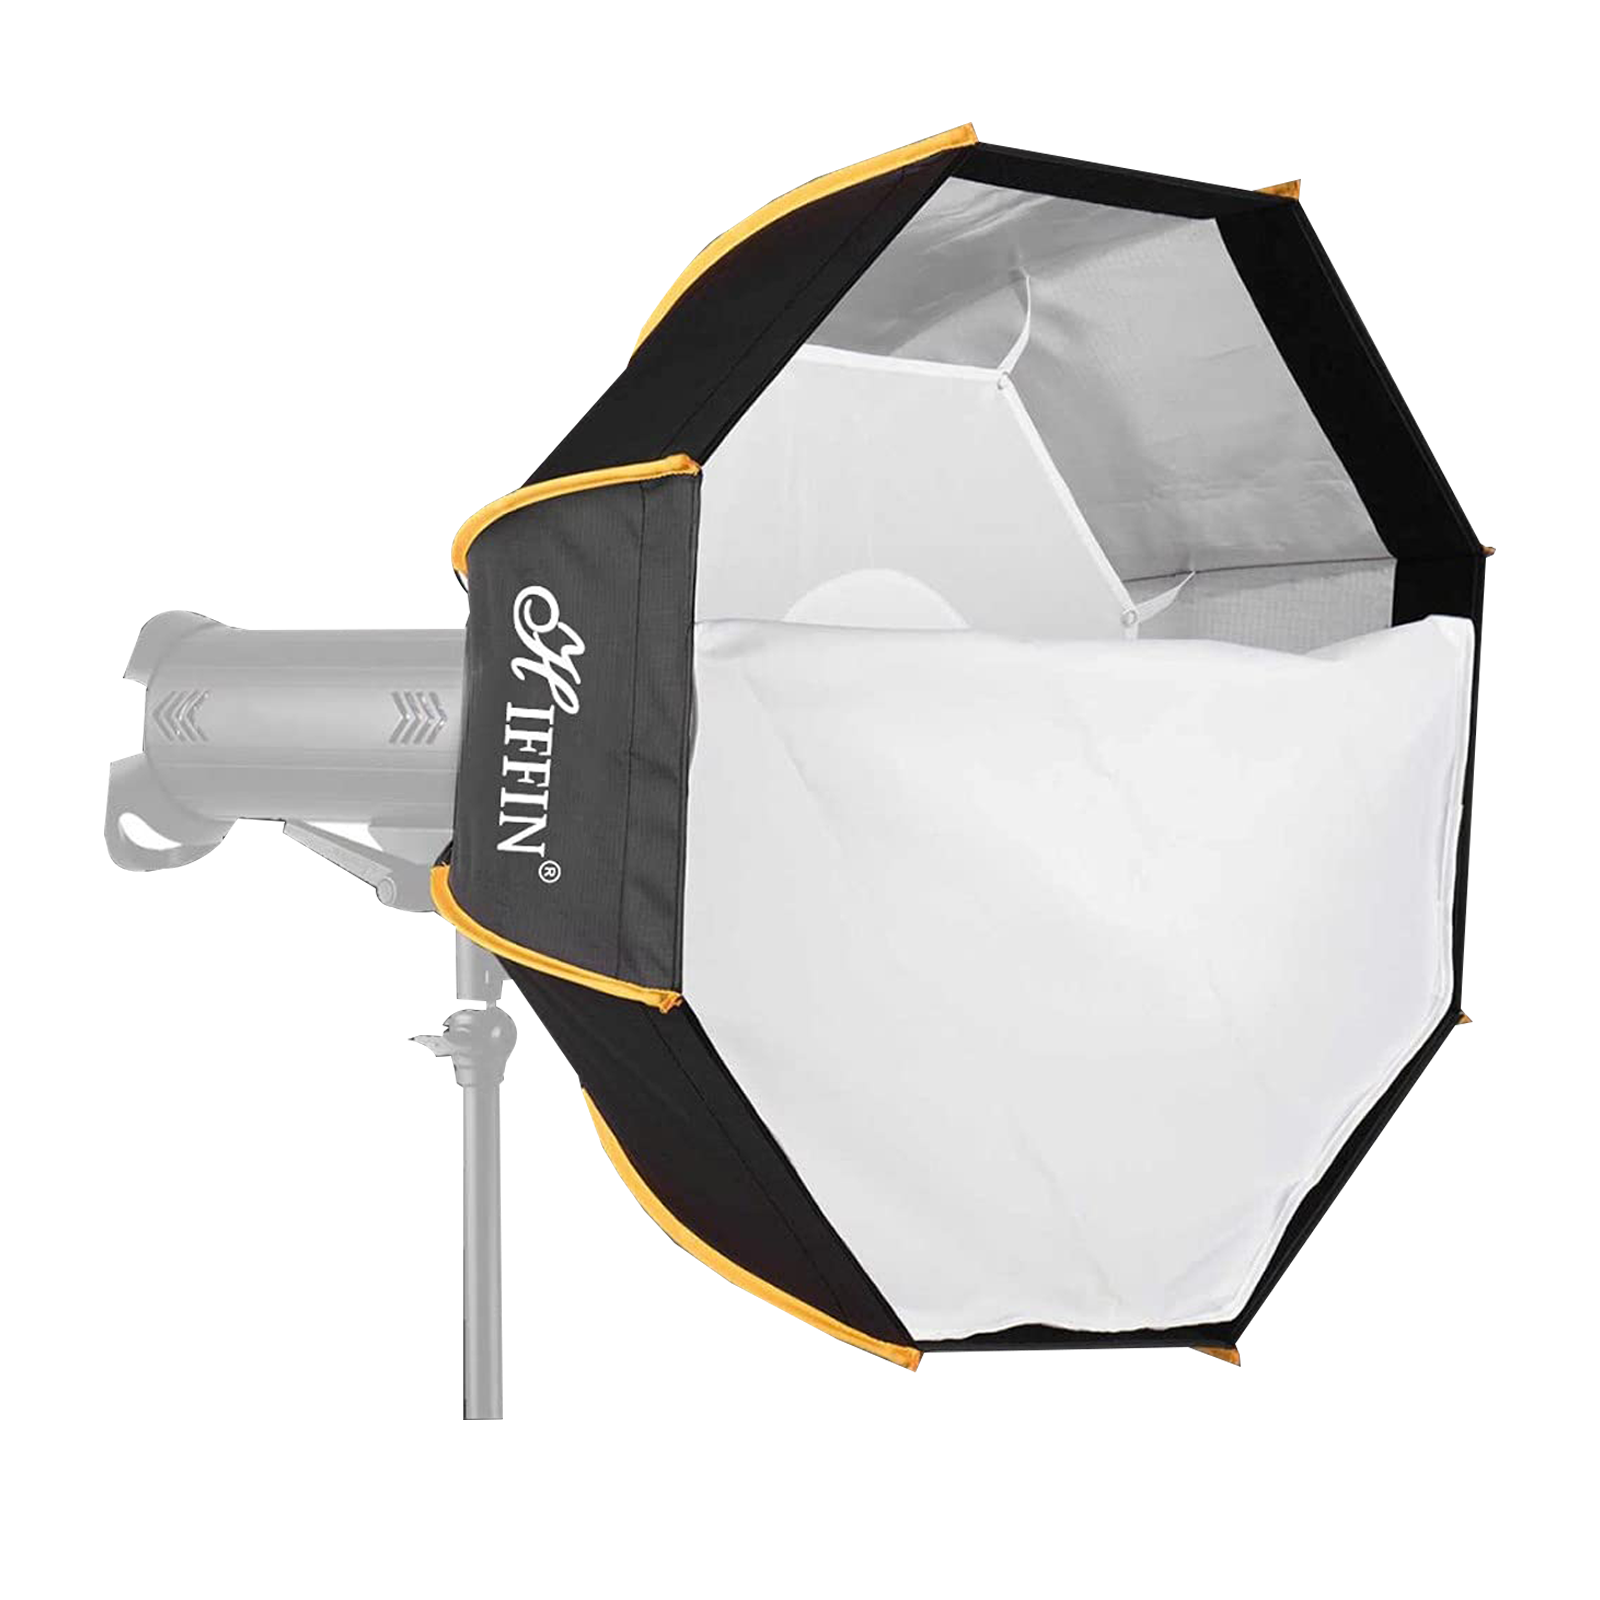 HIFFIN Softbox with Carry Bag for Still Photography (Octagonal Design)